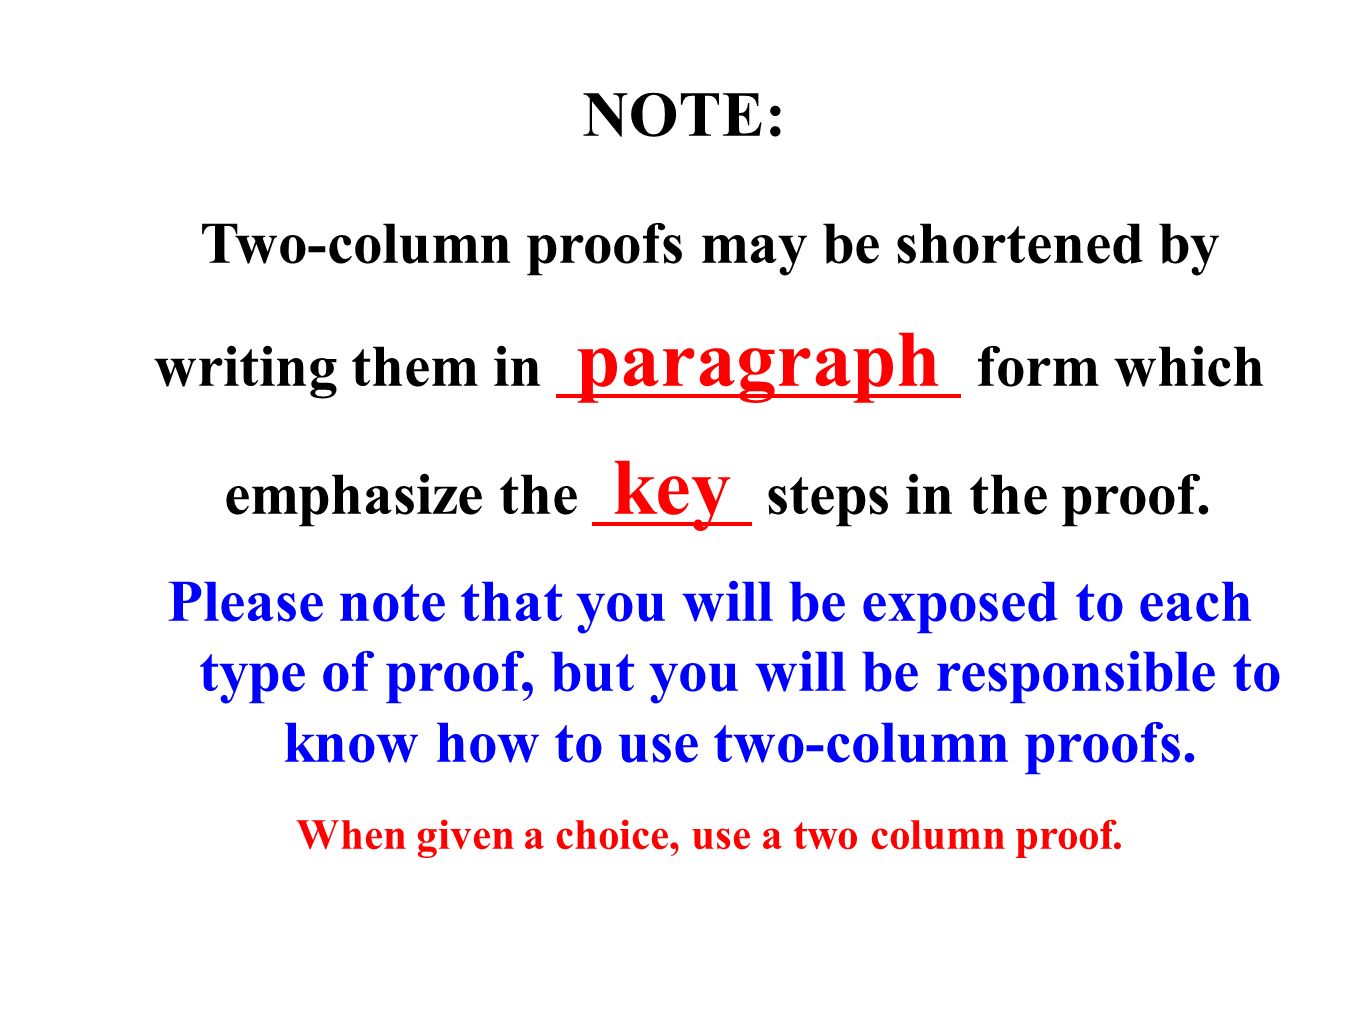 Example of two-column proof vs. paragraph proof